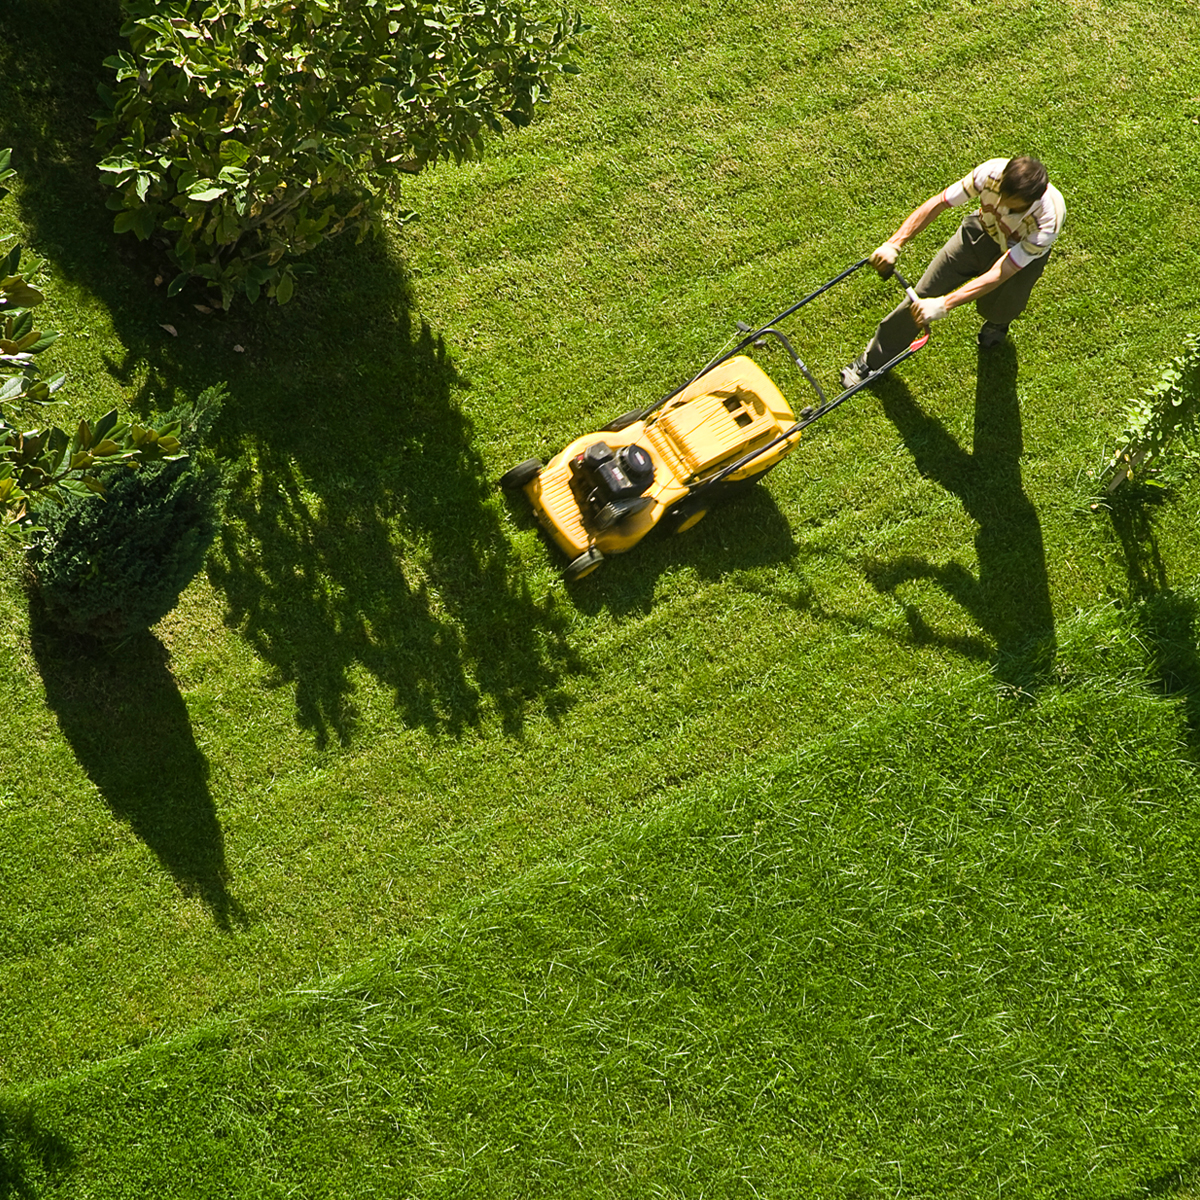 The Grass Is Greener On My Side Lawn Maintenance Tips To Keep